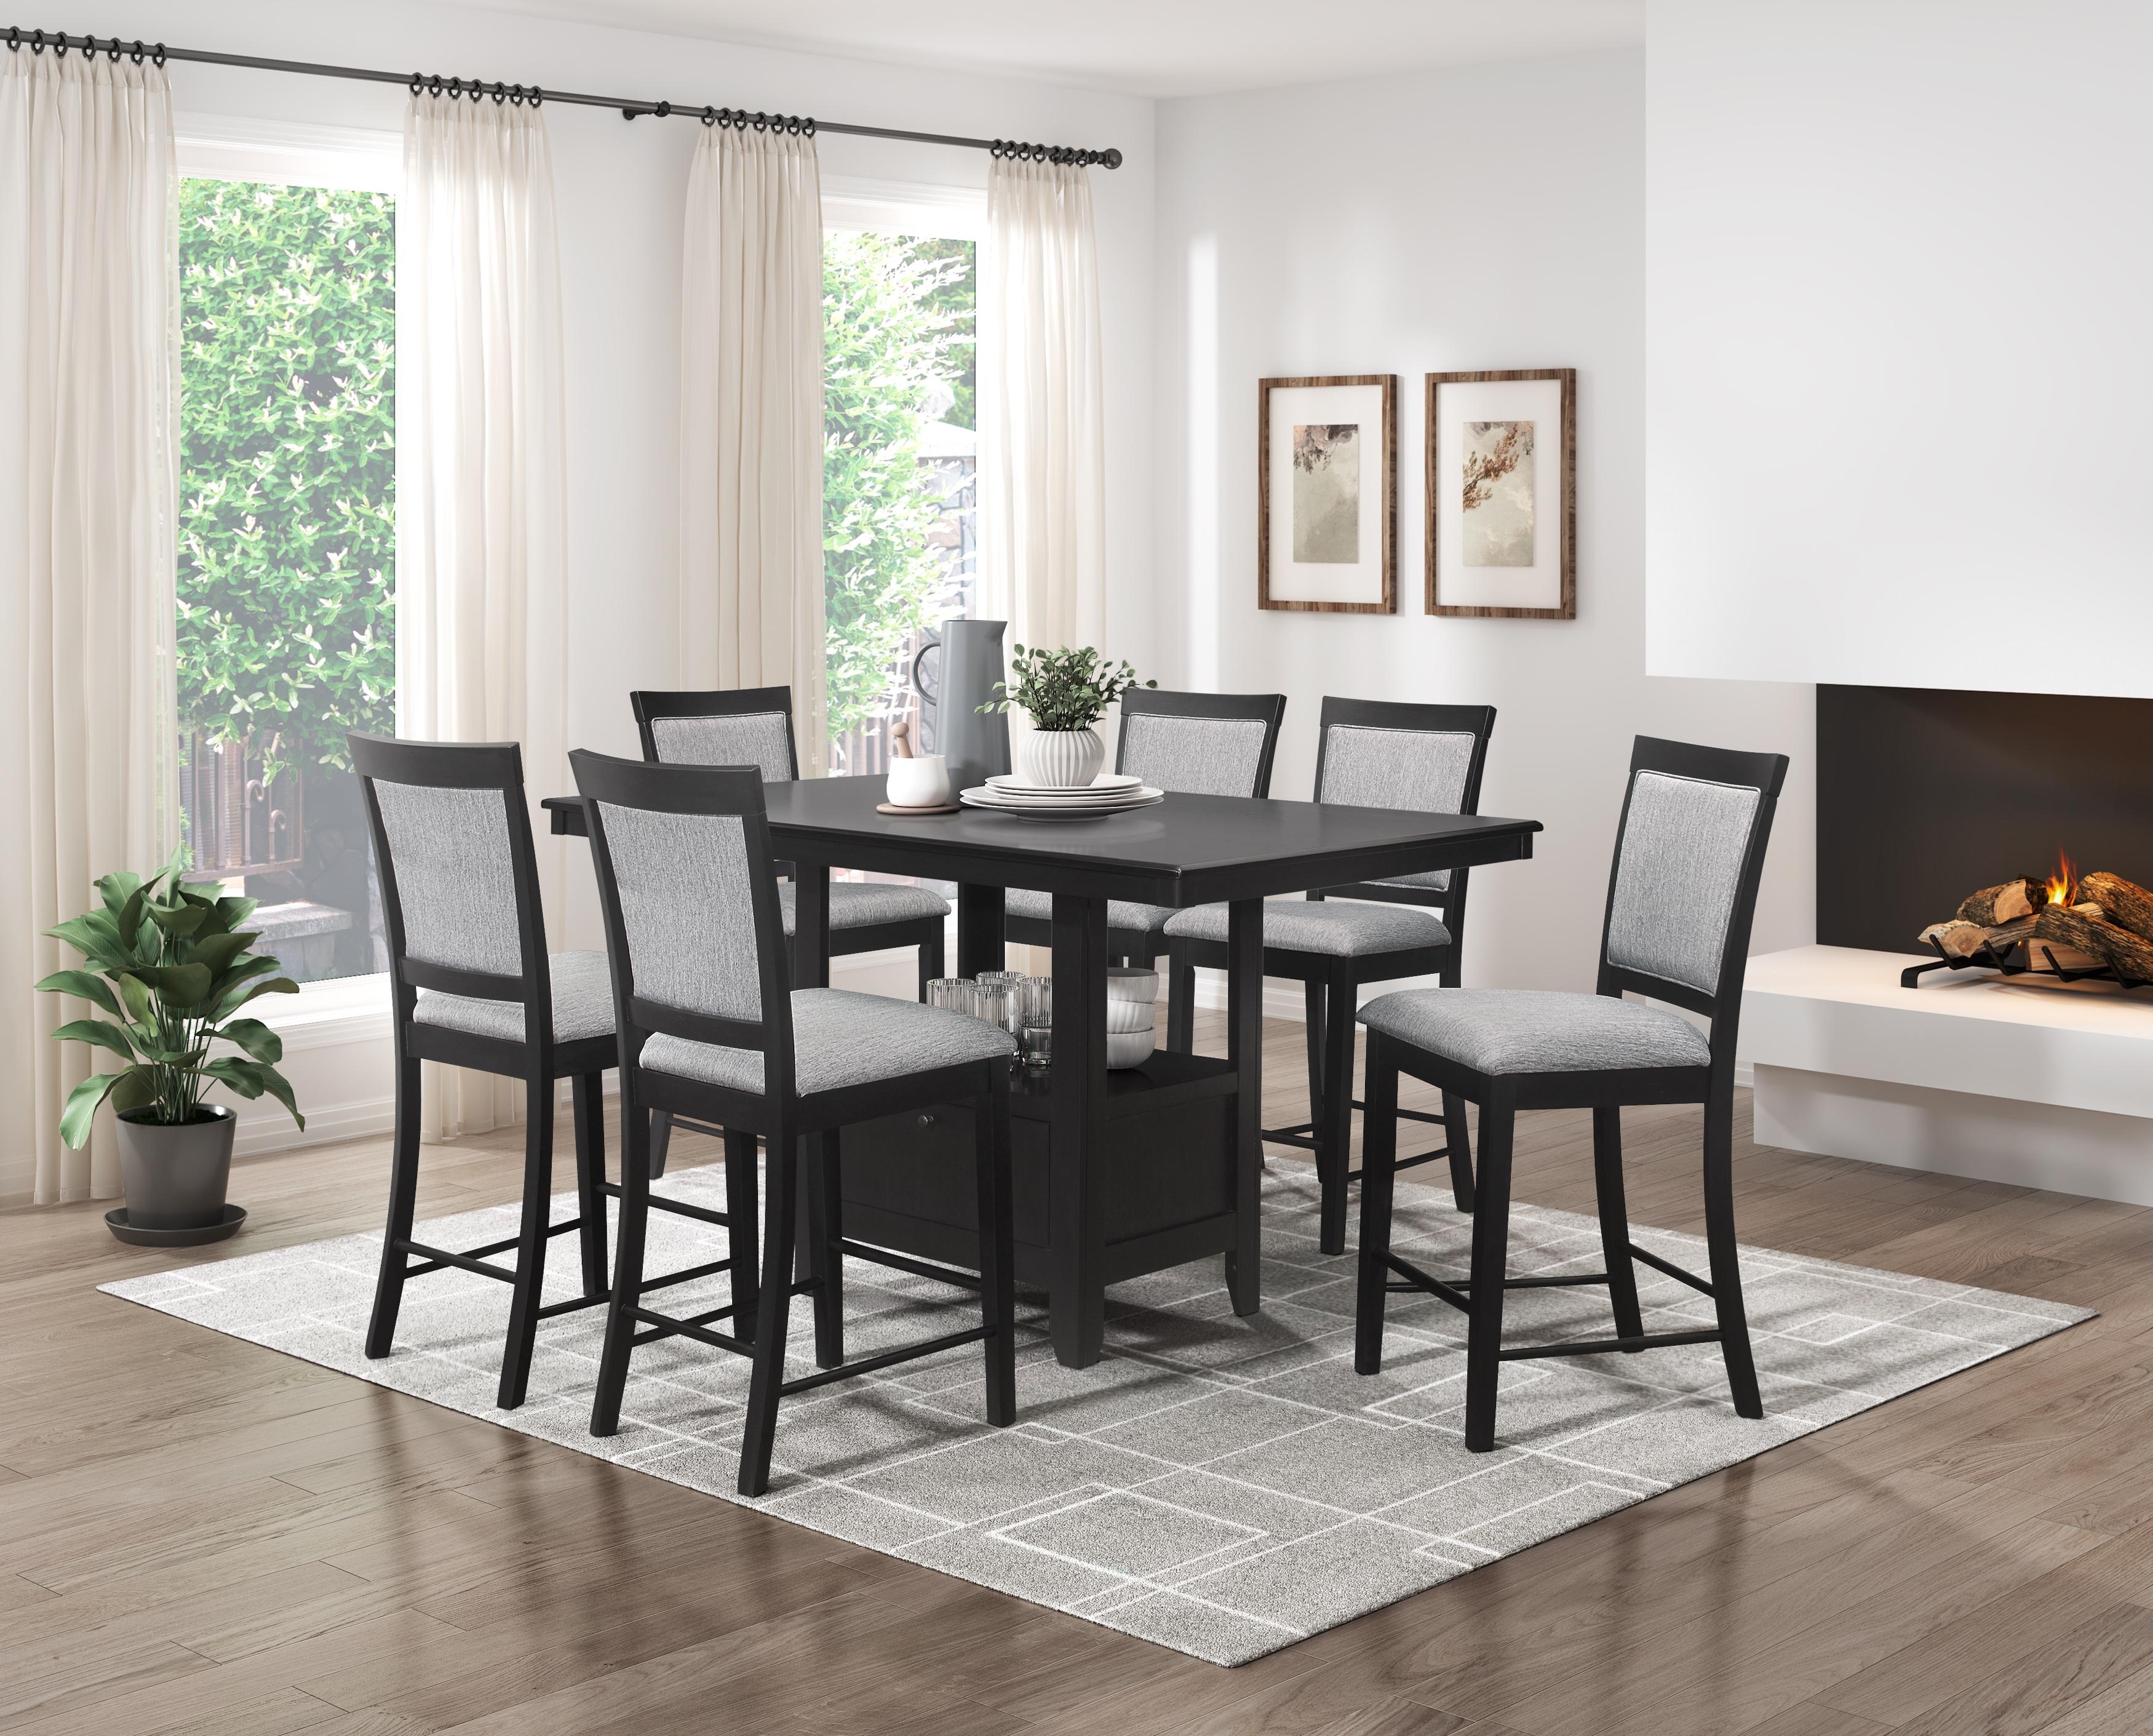 Contemporary Counter Height Table Set Raven Counter Height Table Set 7PCS 5825-36-CT-7PCS 5825-36-CT-7PCS in Charcoal Grey Fabric